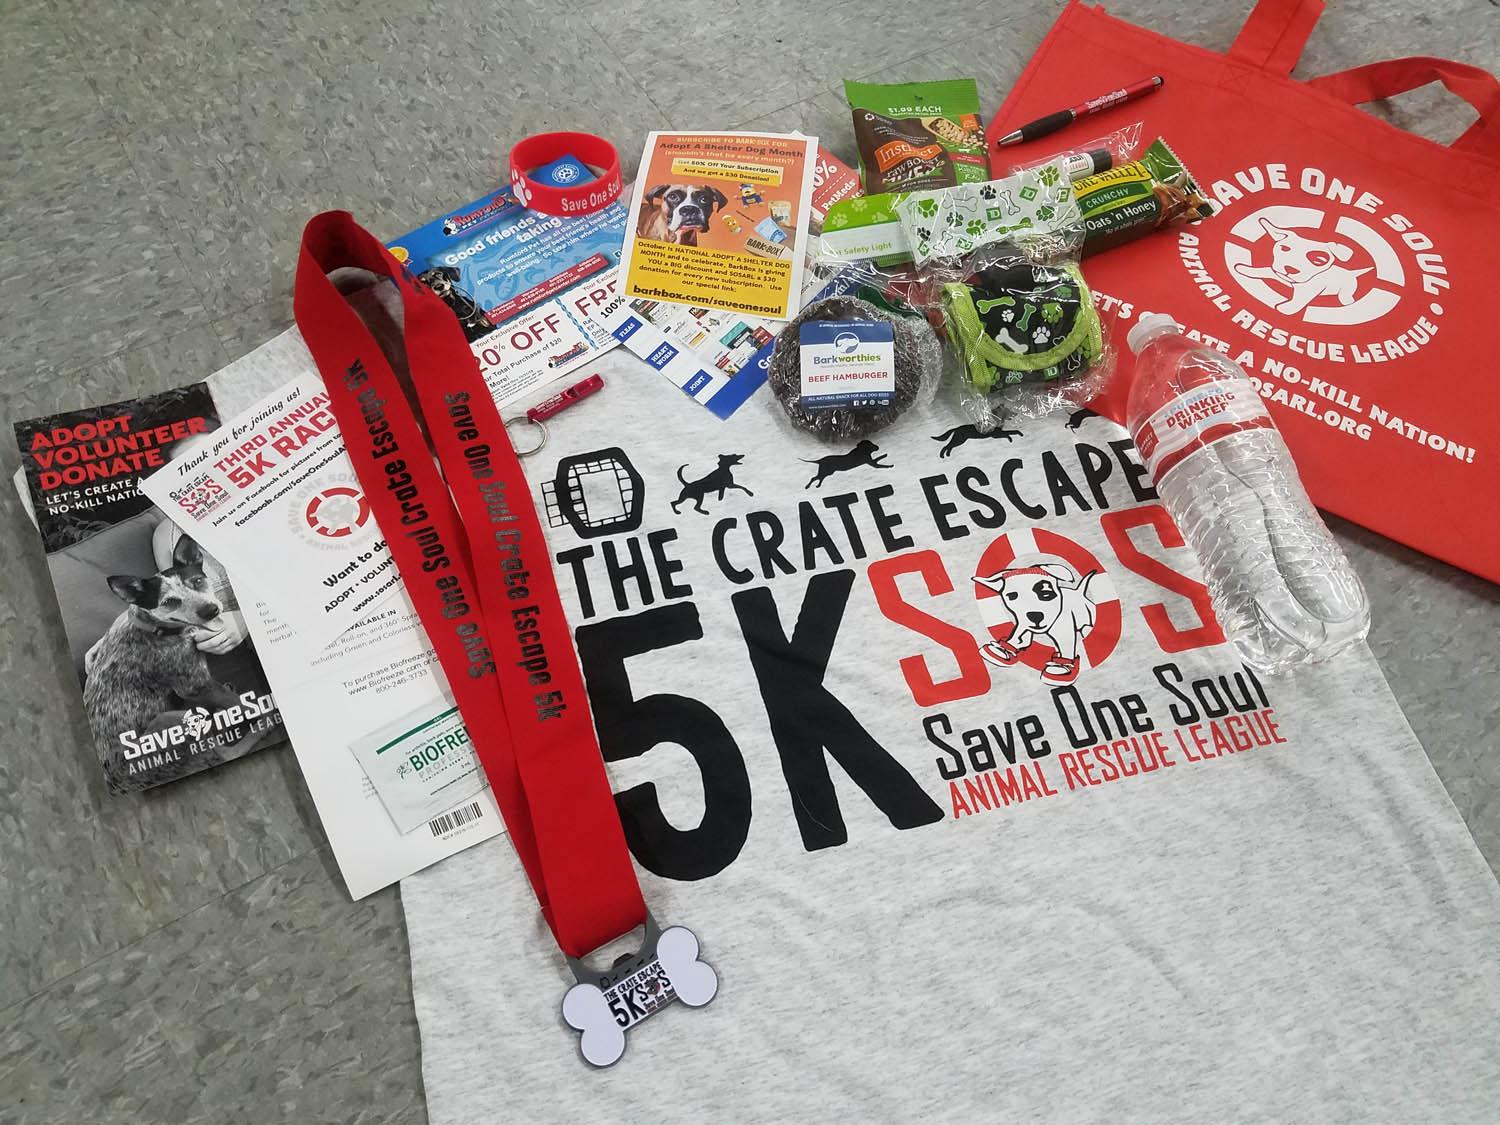 Goodie Bags The Crate Escape 5K 2023 - Save One Soul Animal Rescue League RI